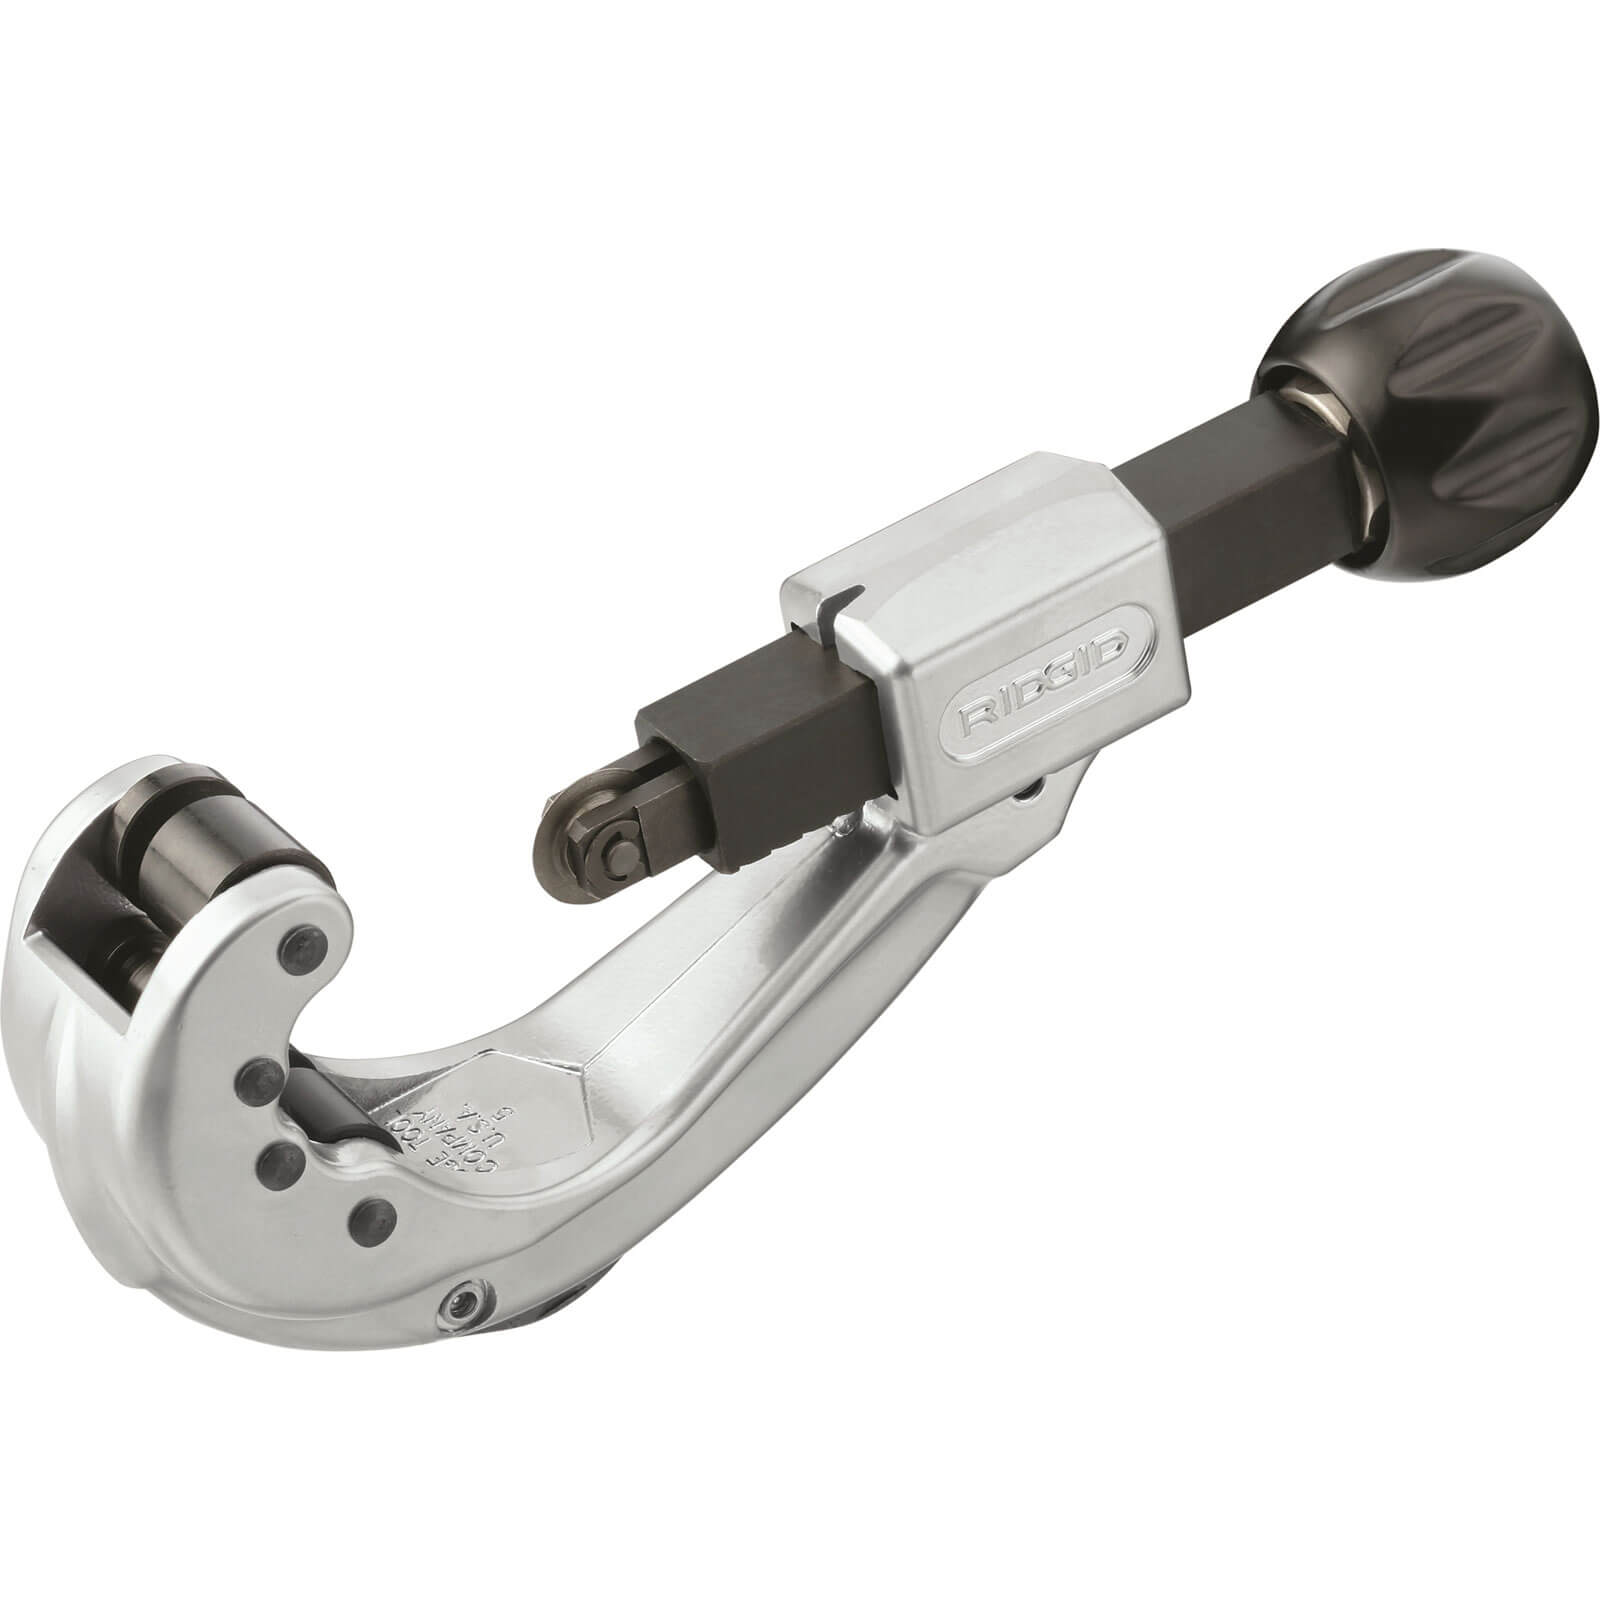 Image of Ridgid Ratcheting Enclosed Feed Pipe Cutter 6mm - 60mm